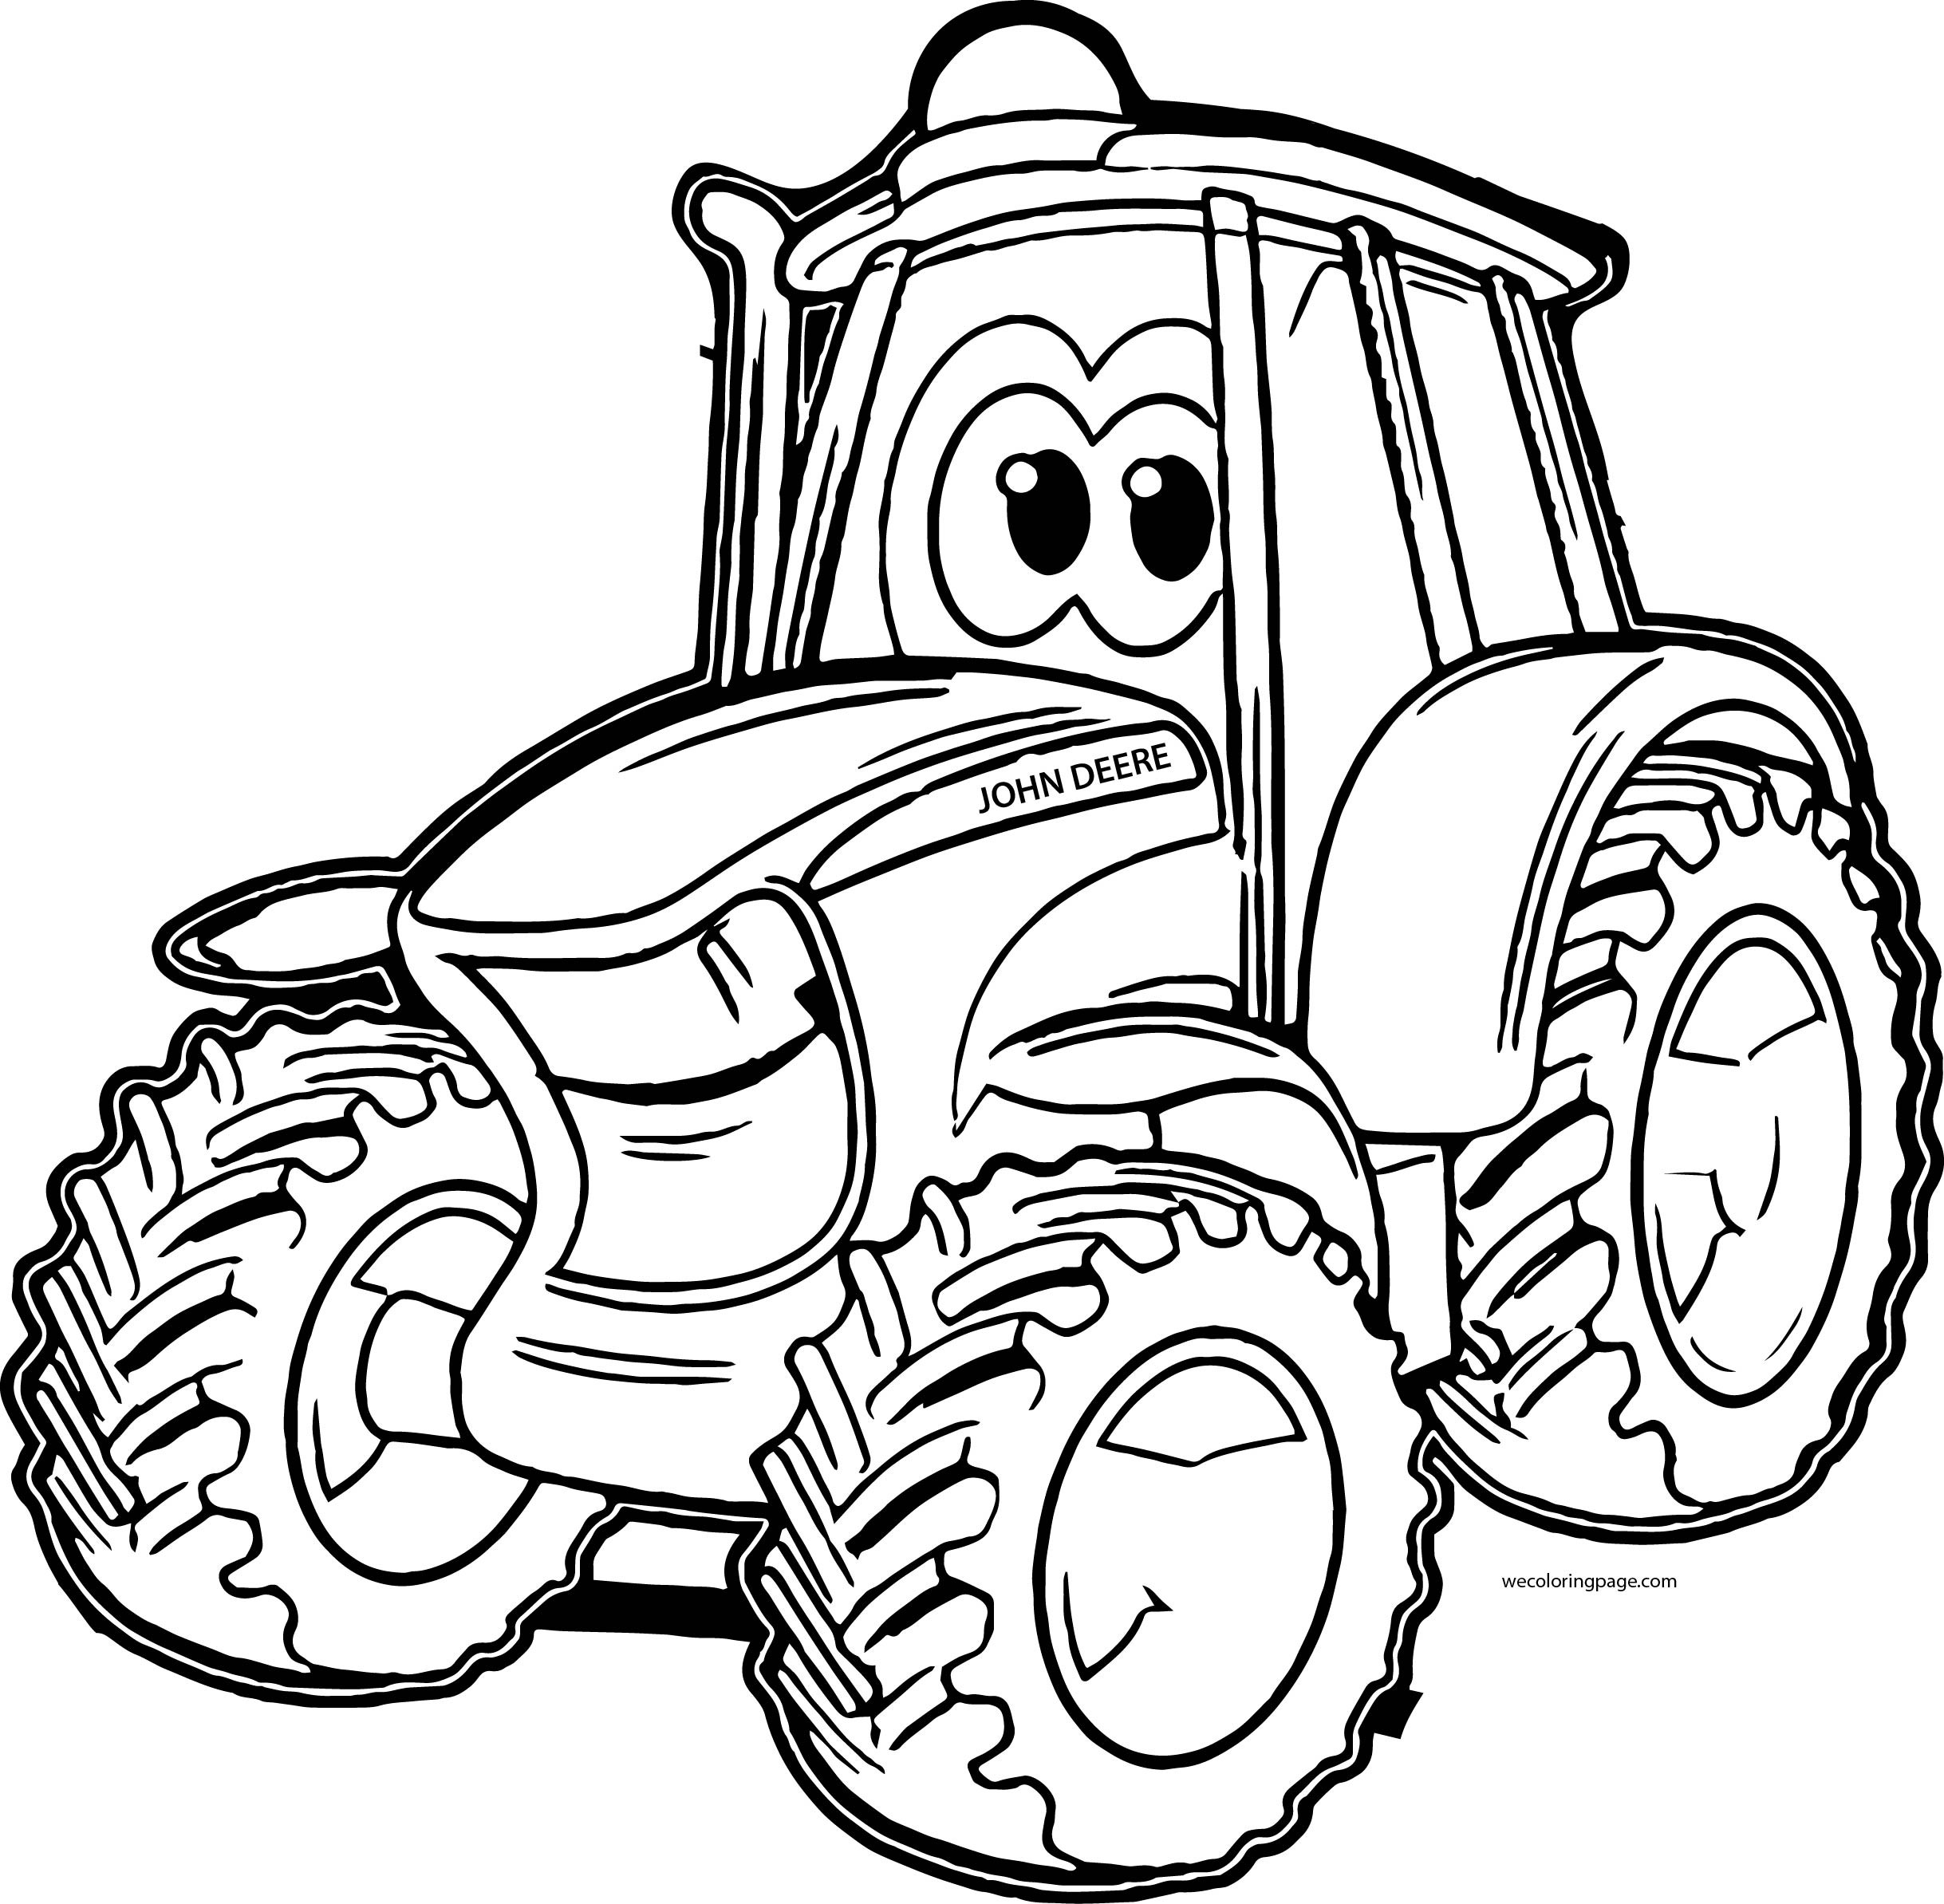 Tractors Coloring Book
 John Johnny Deere Tractor Coloring Pages